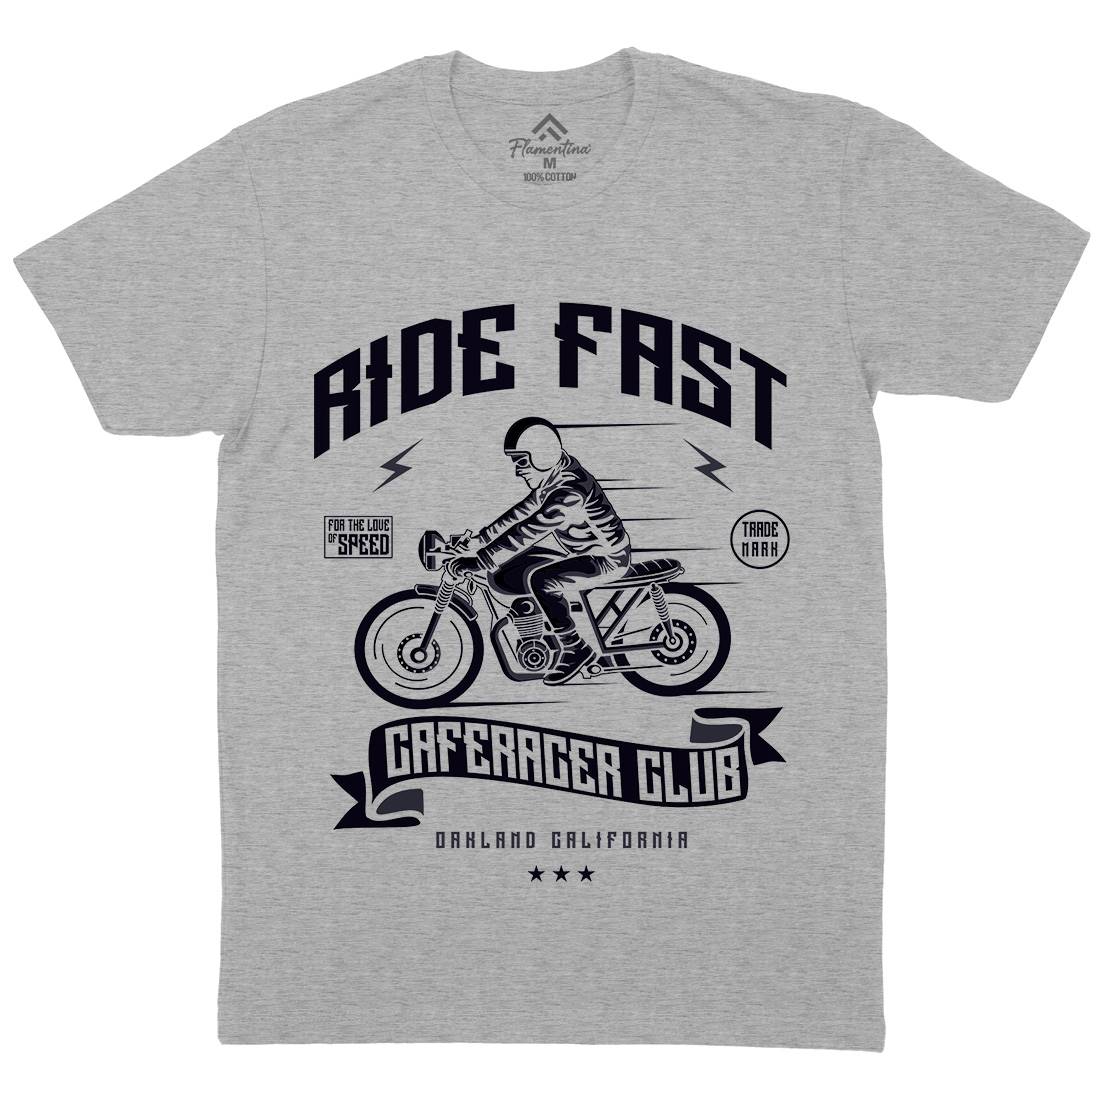 Ride Fast Mens Crew Neck T-Shirt Motorcycles A117